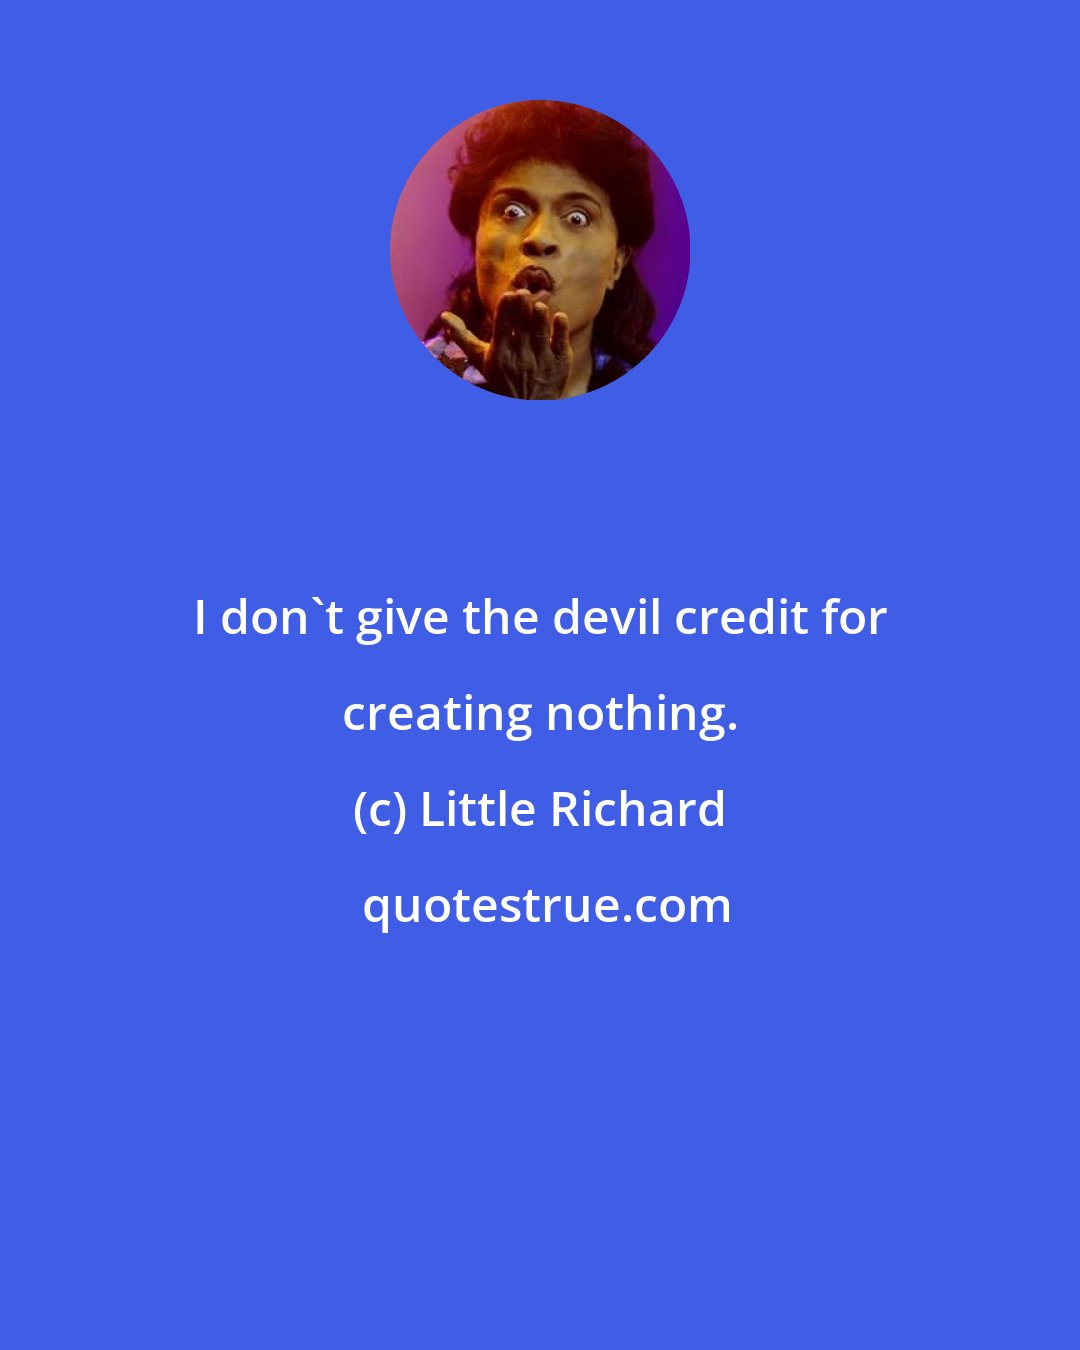 Little Richard: I don't give the devil credit for creating nothing.